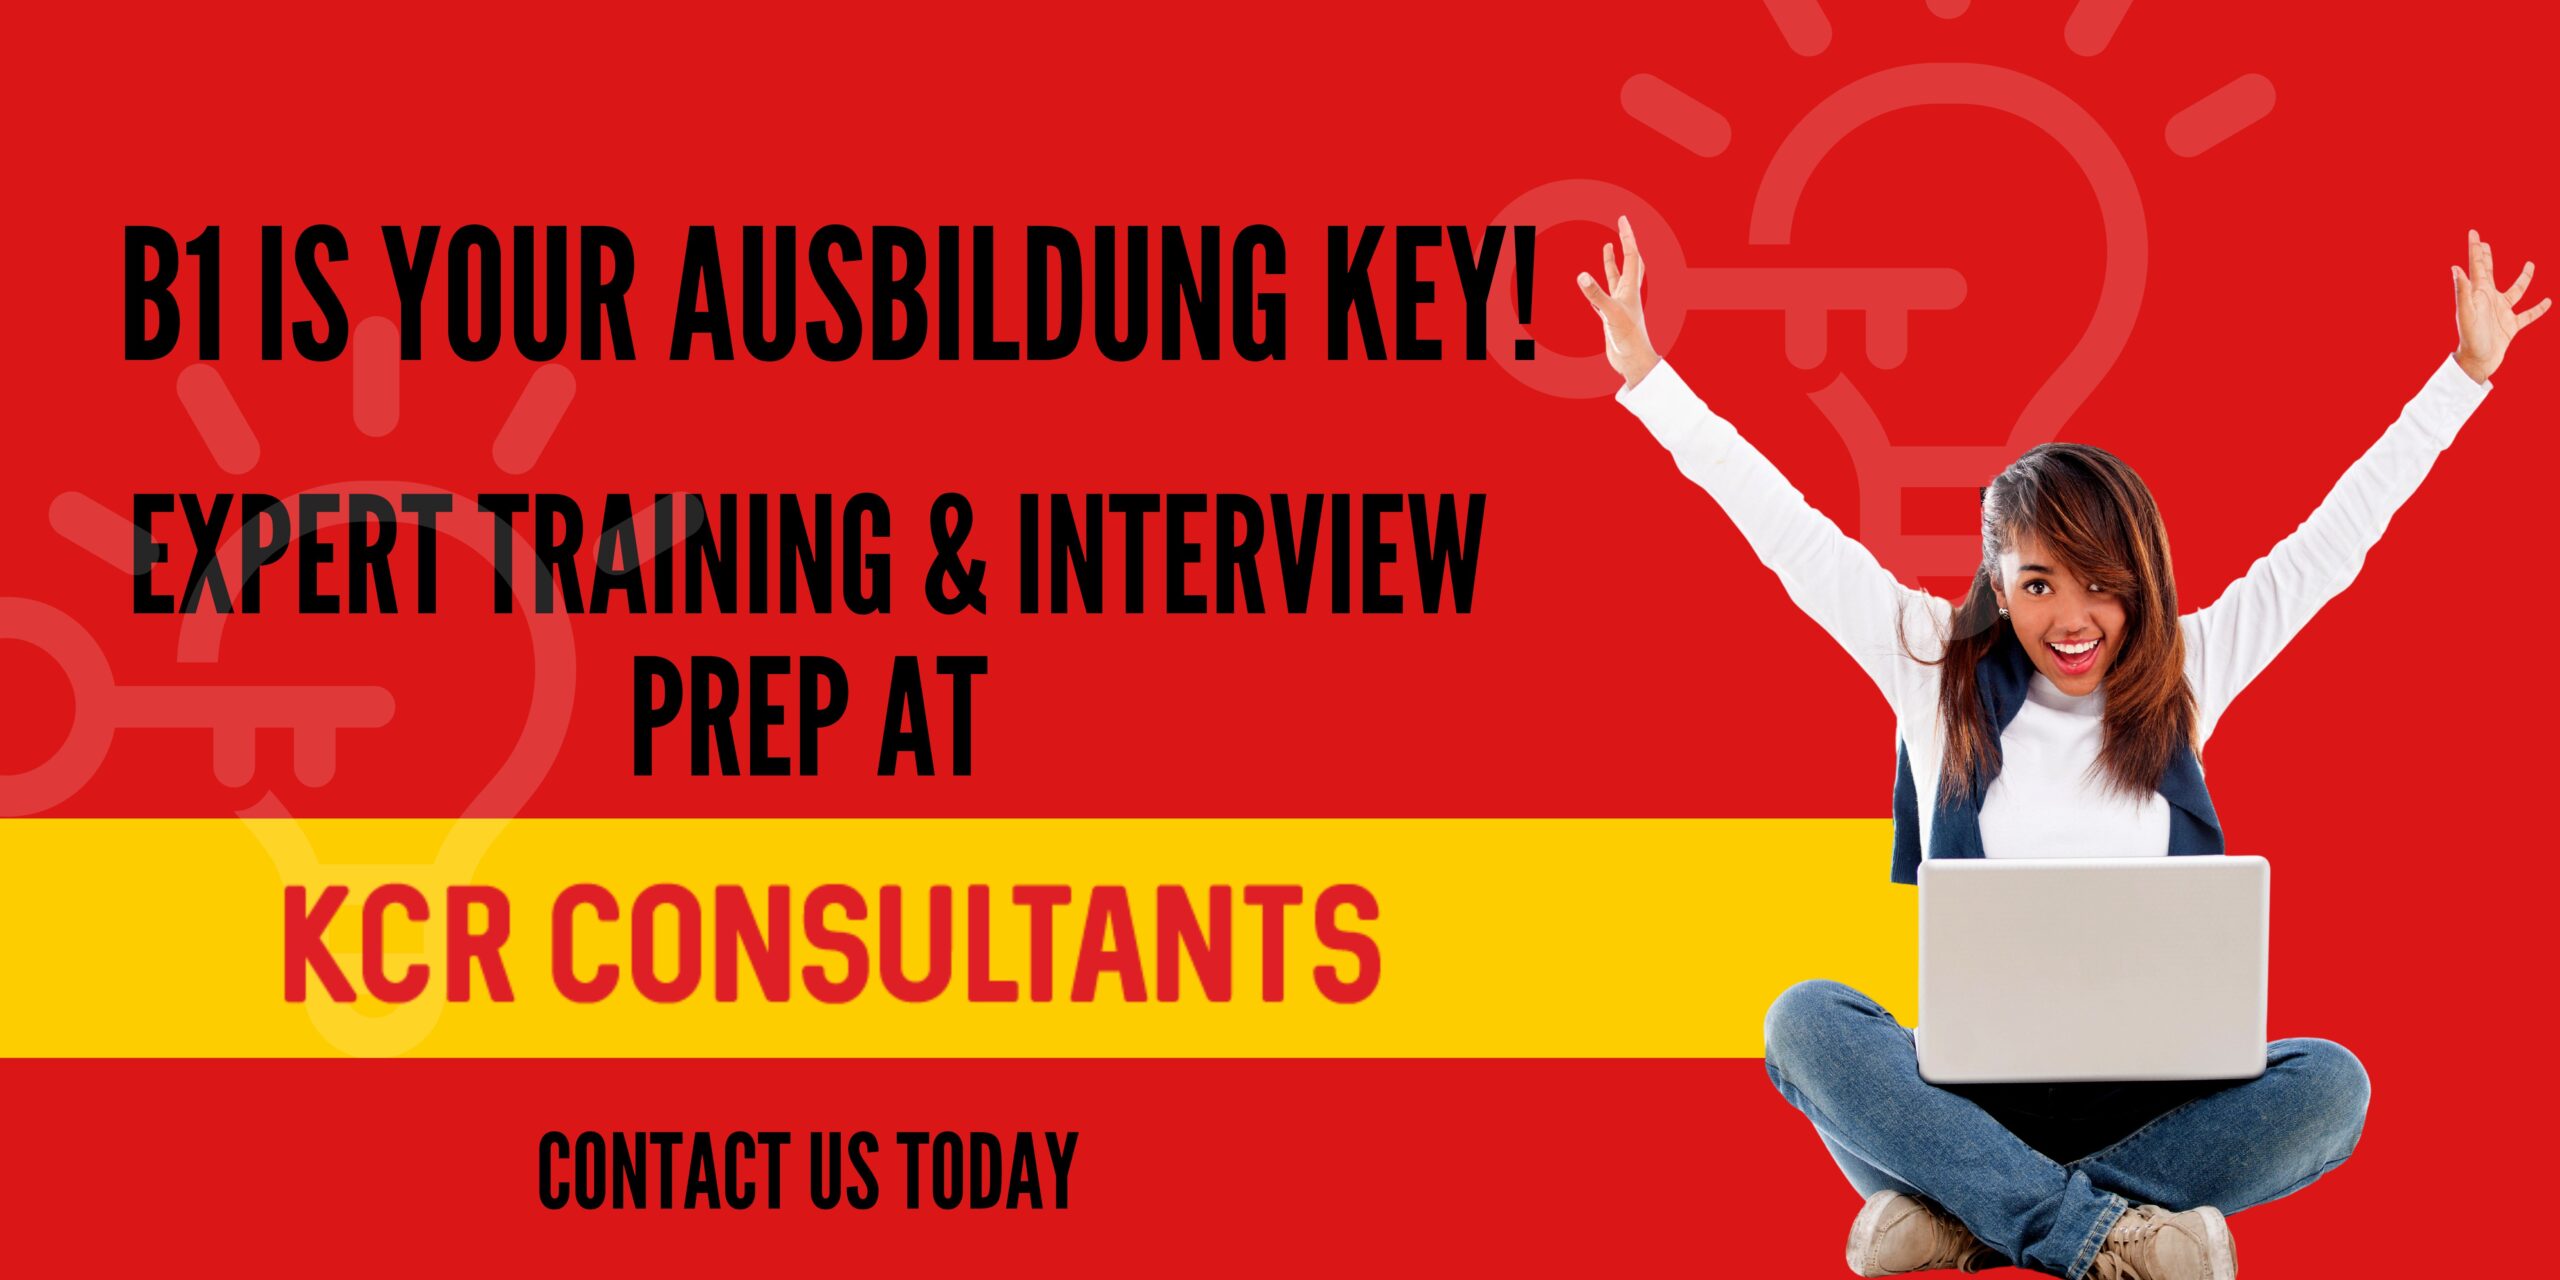 Ausbildung with a B1 level German - KCR CONSULTANTS - Contact us